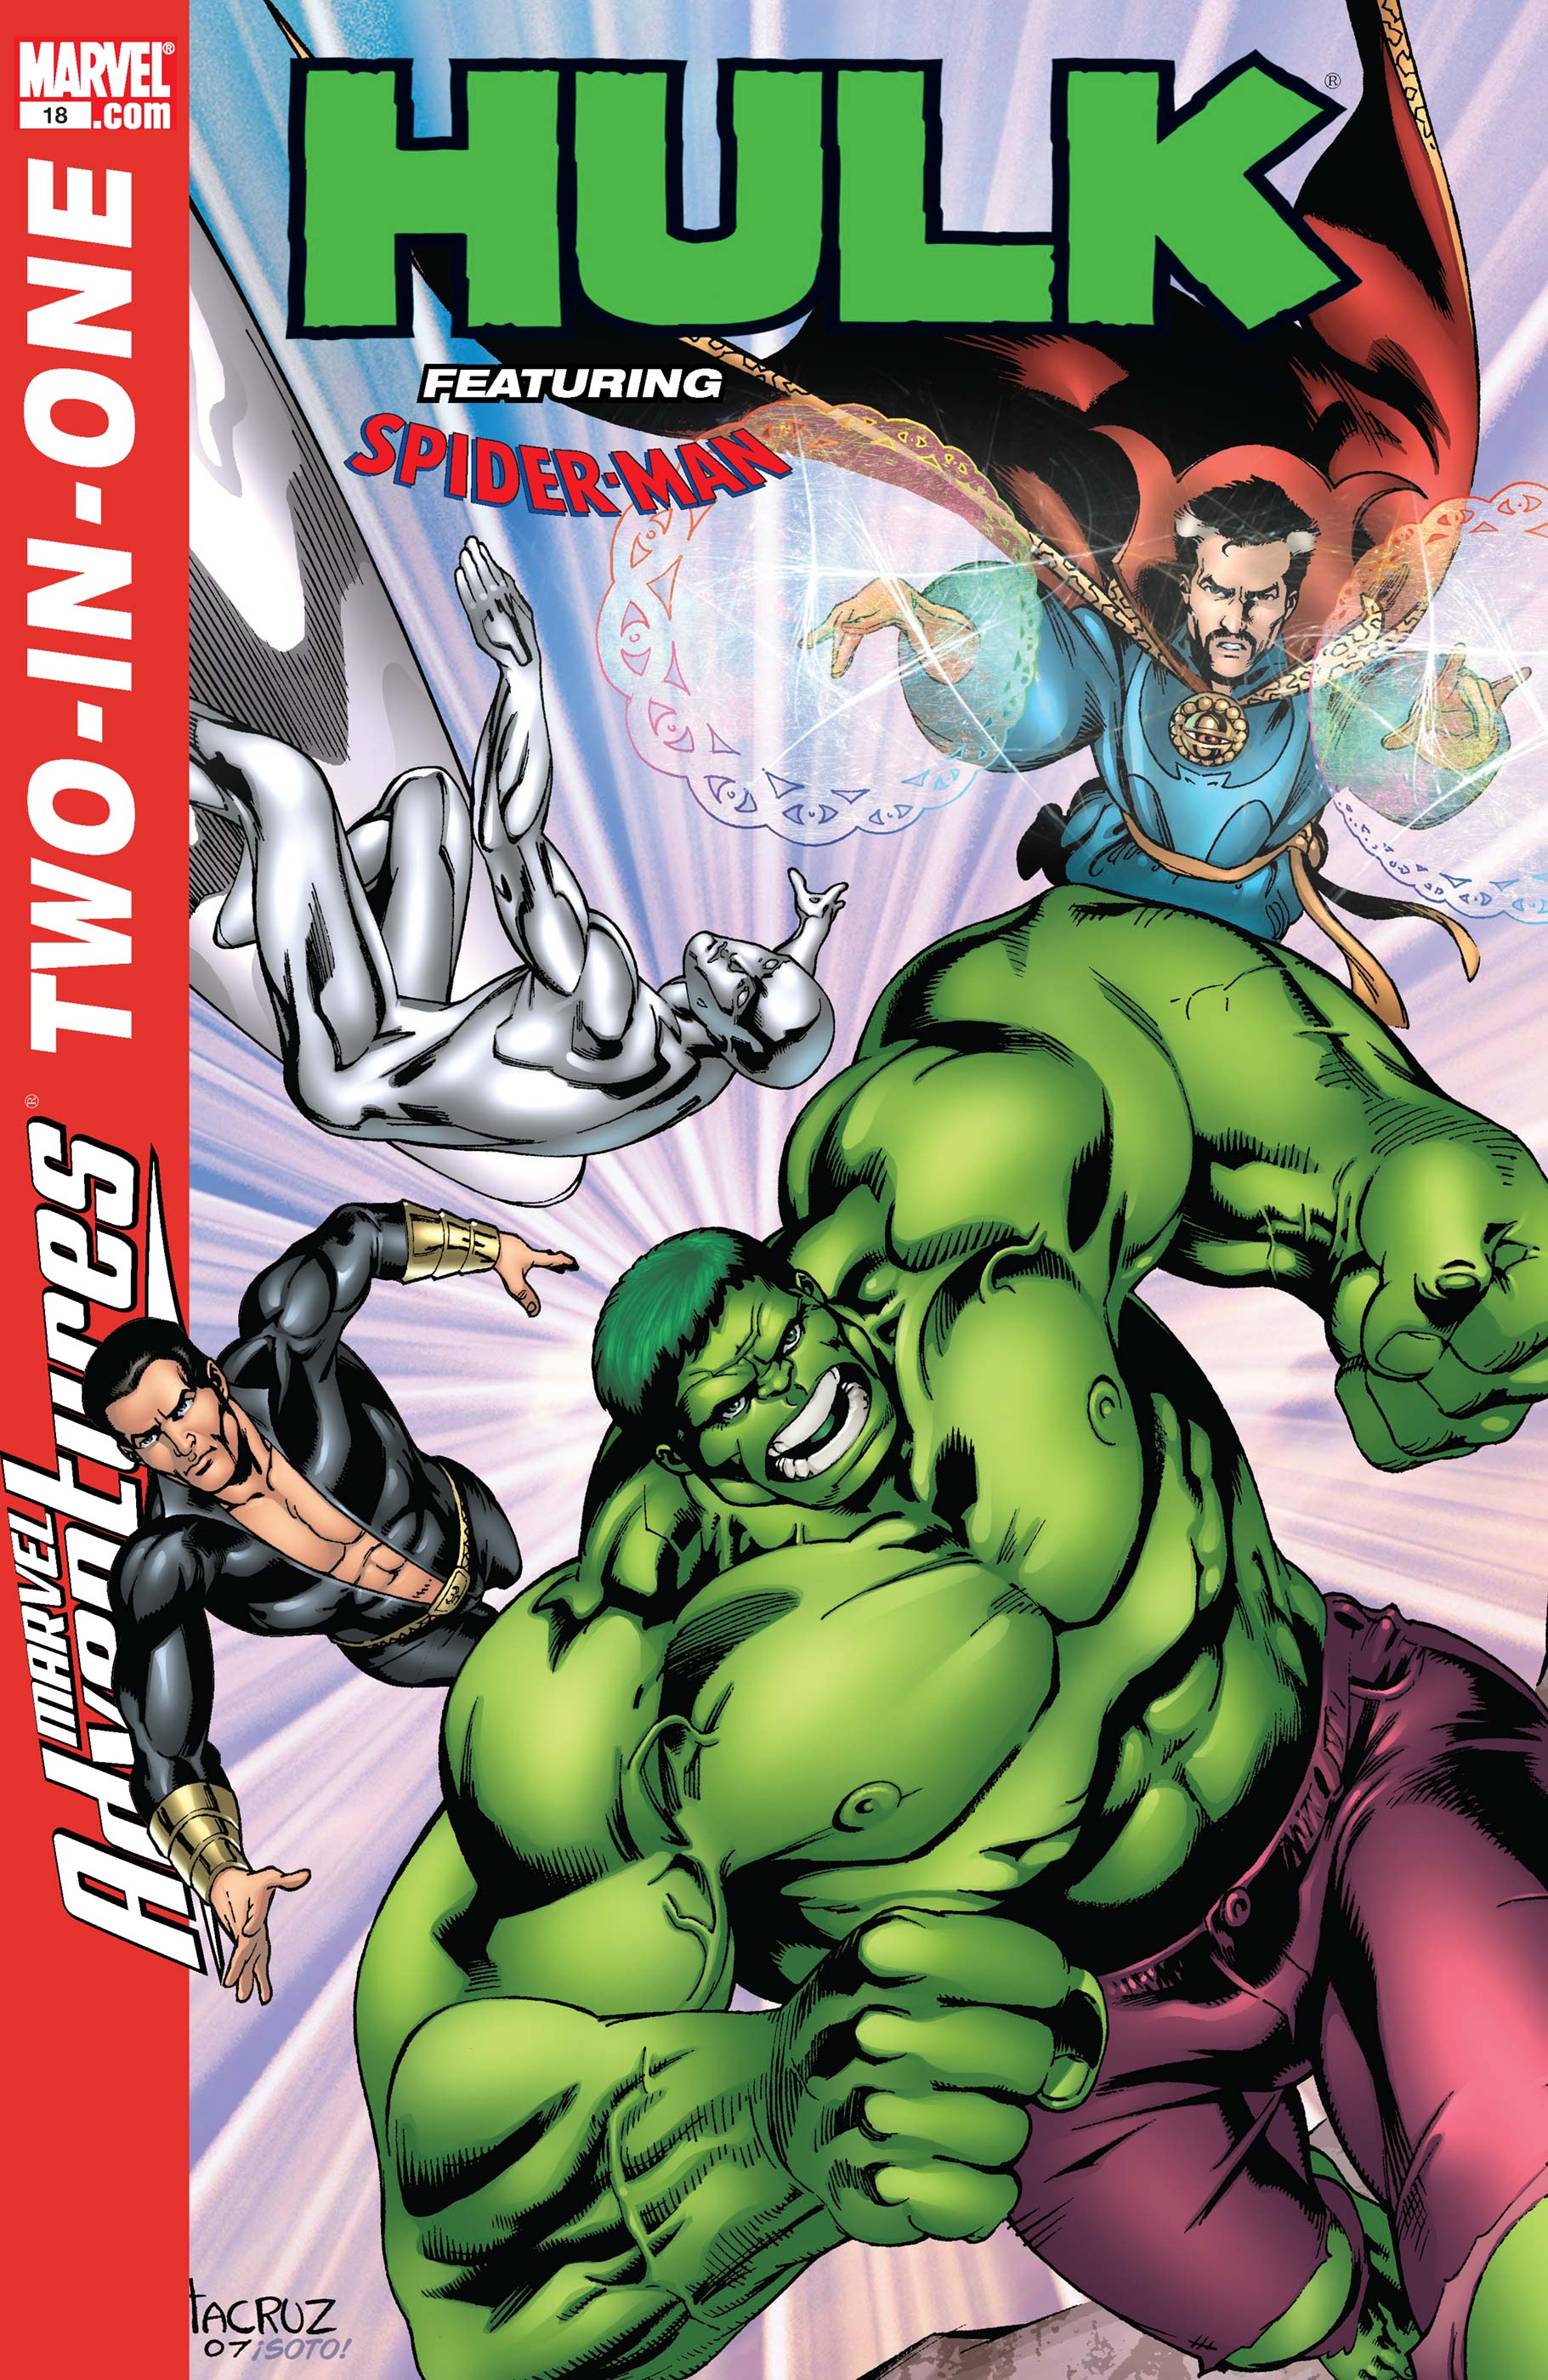 Marvel Adventures Two-in-One (2007) #18